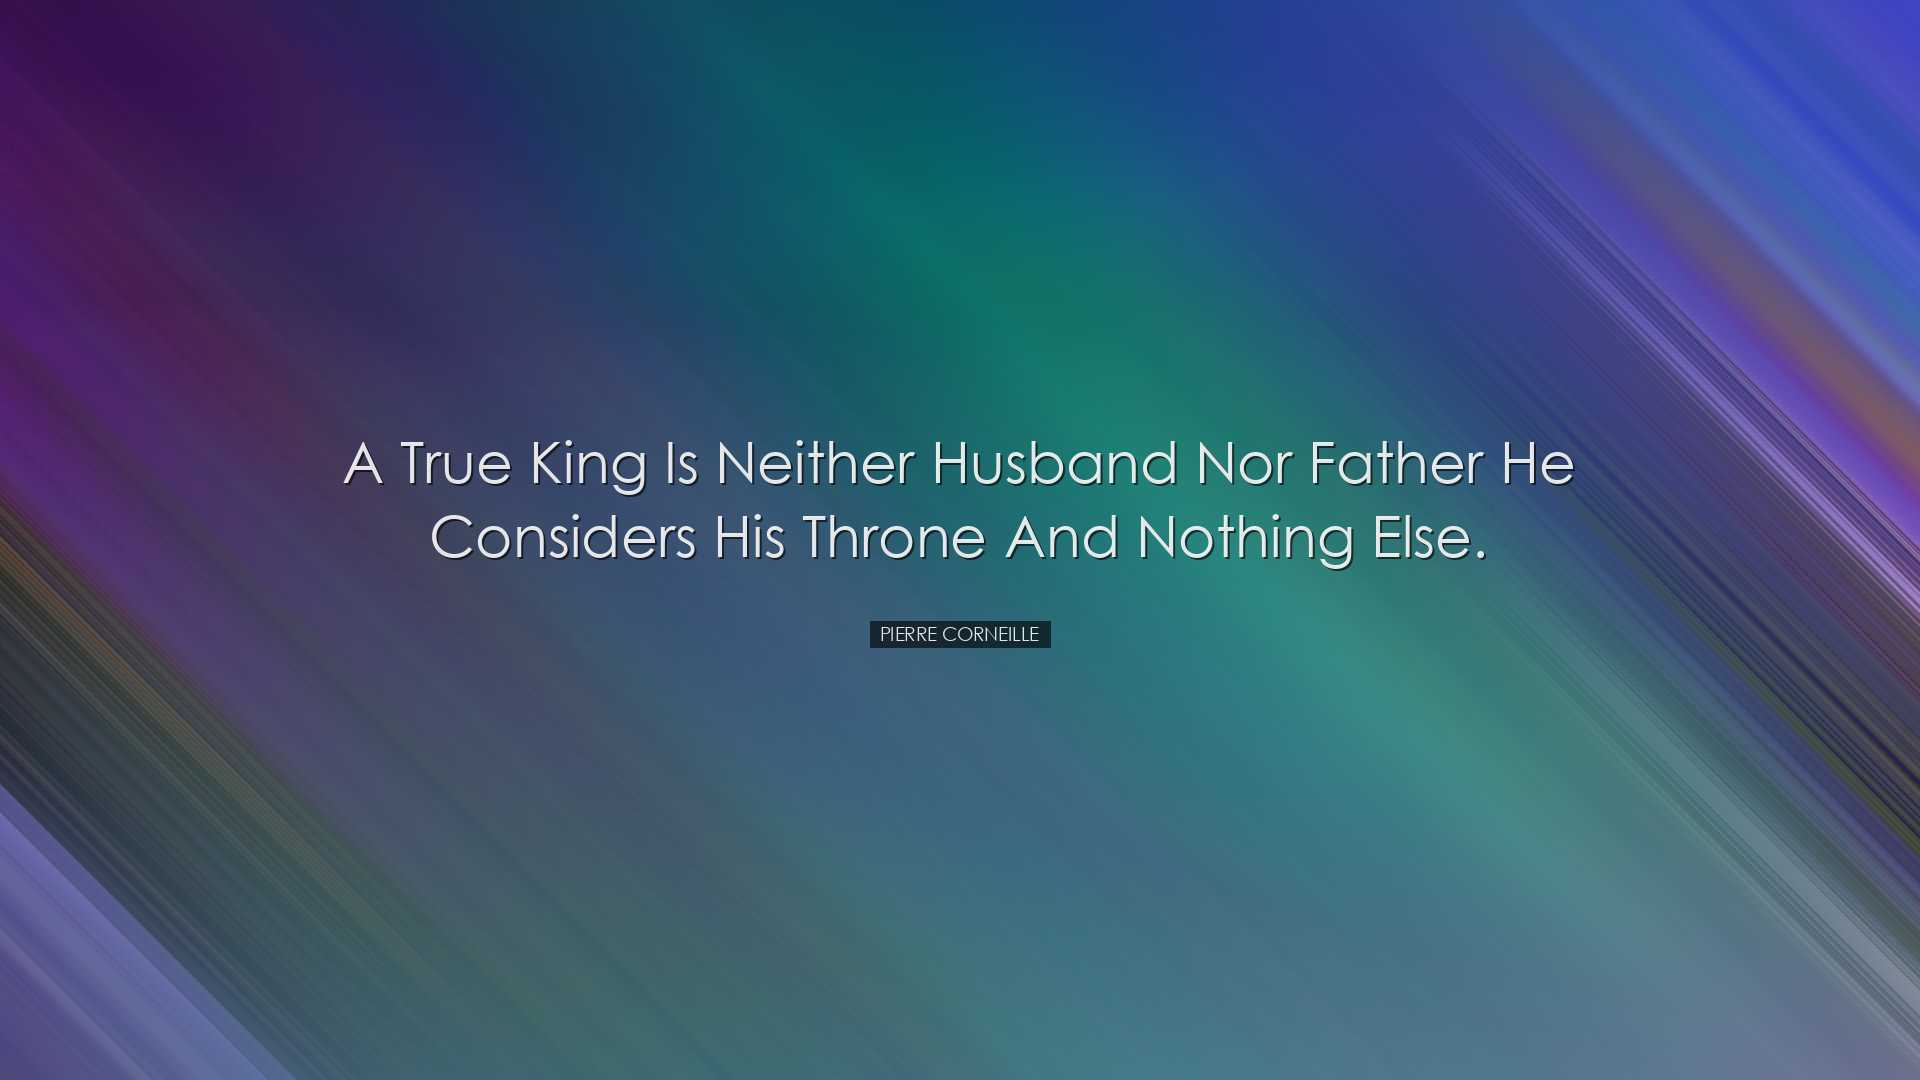 A true king is neither husband nor father he considers his throne